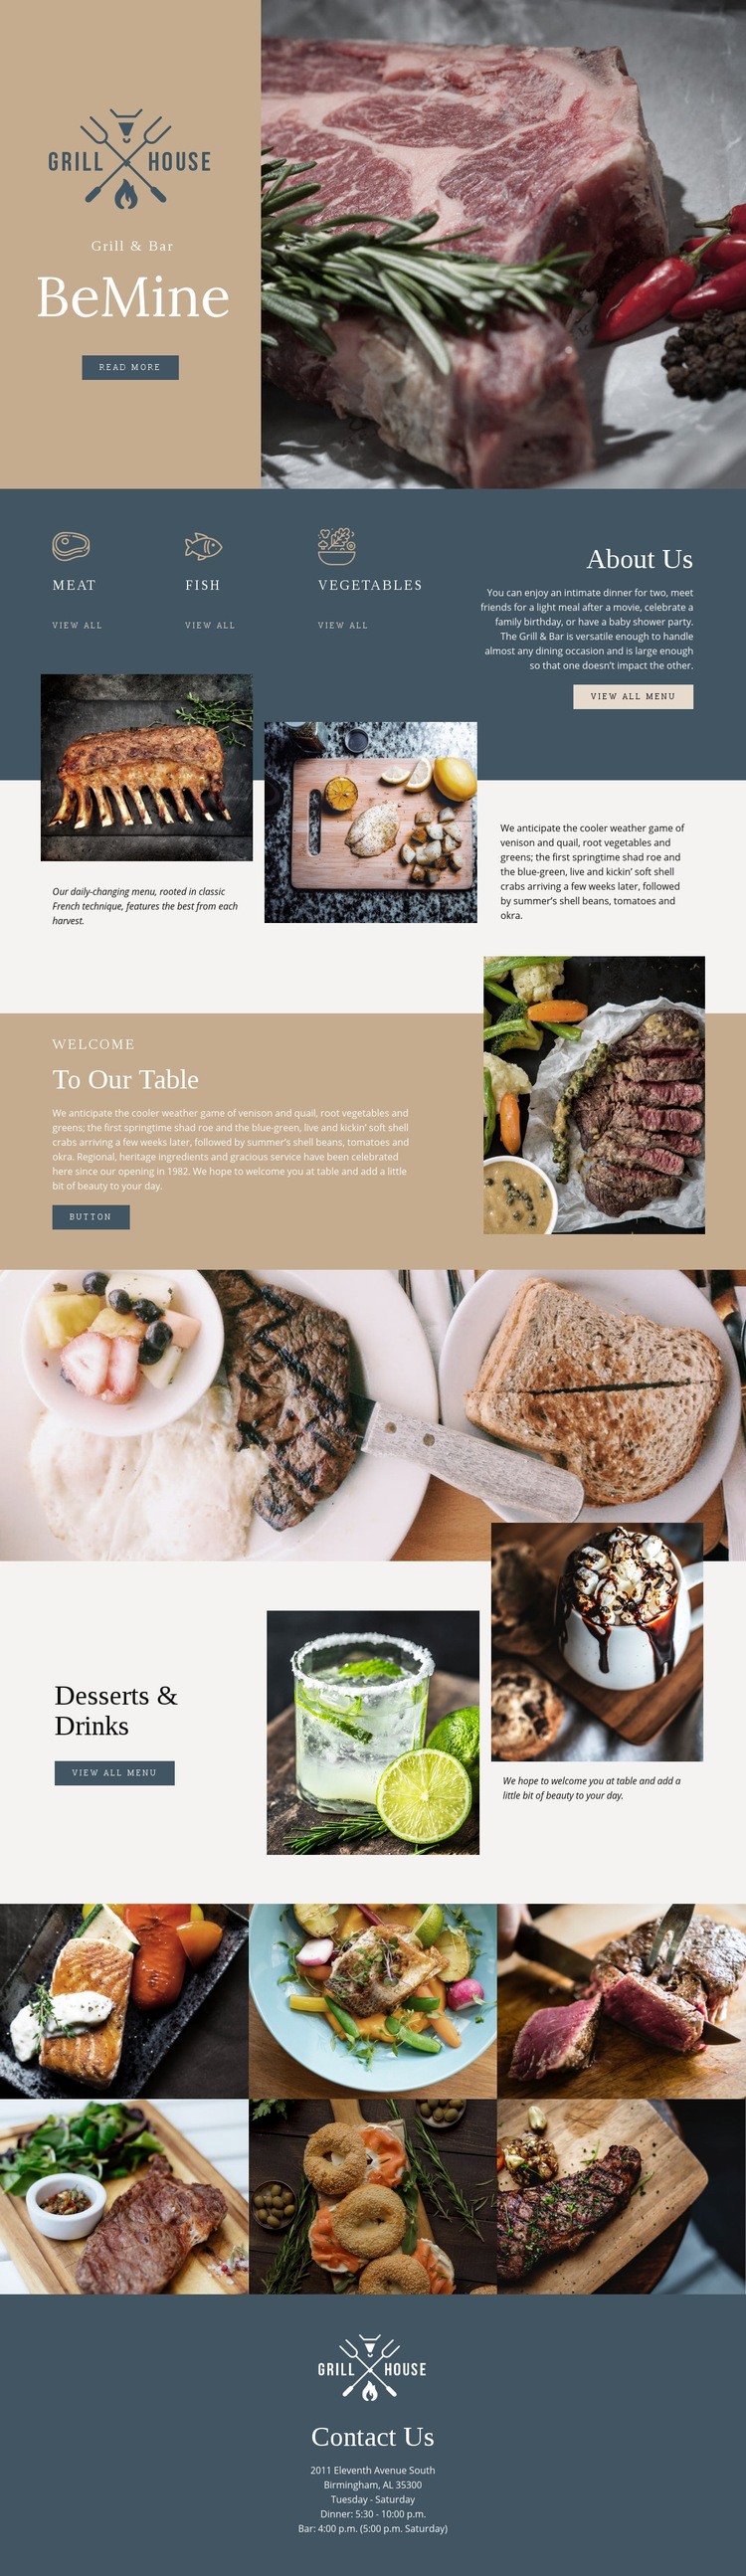 Finest grill house restaurant Html Code Example